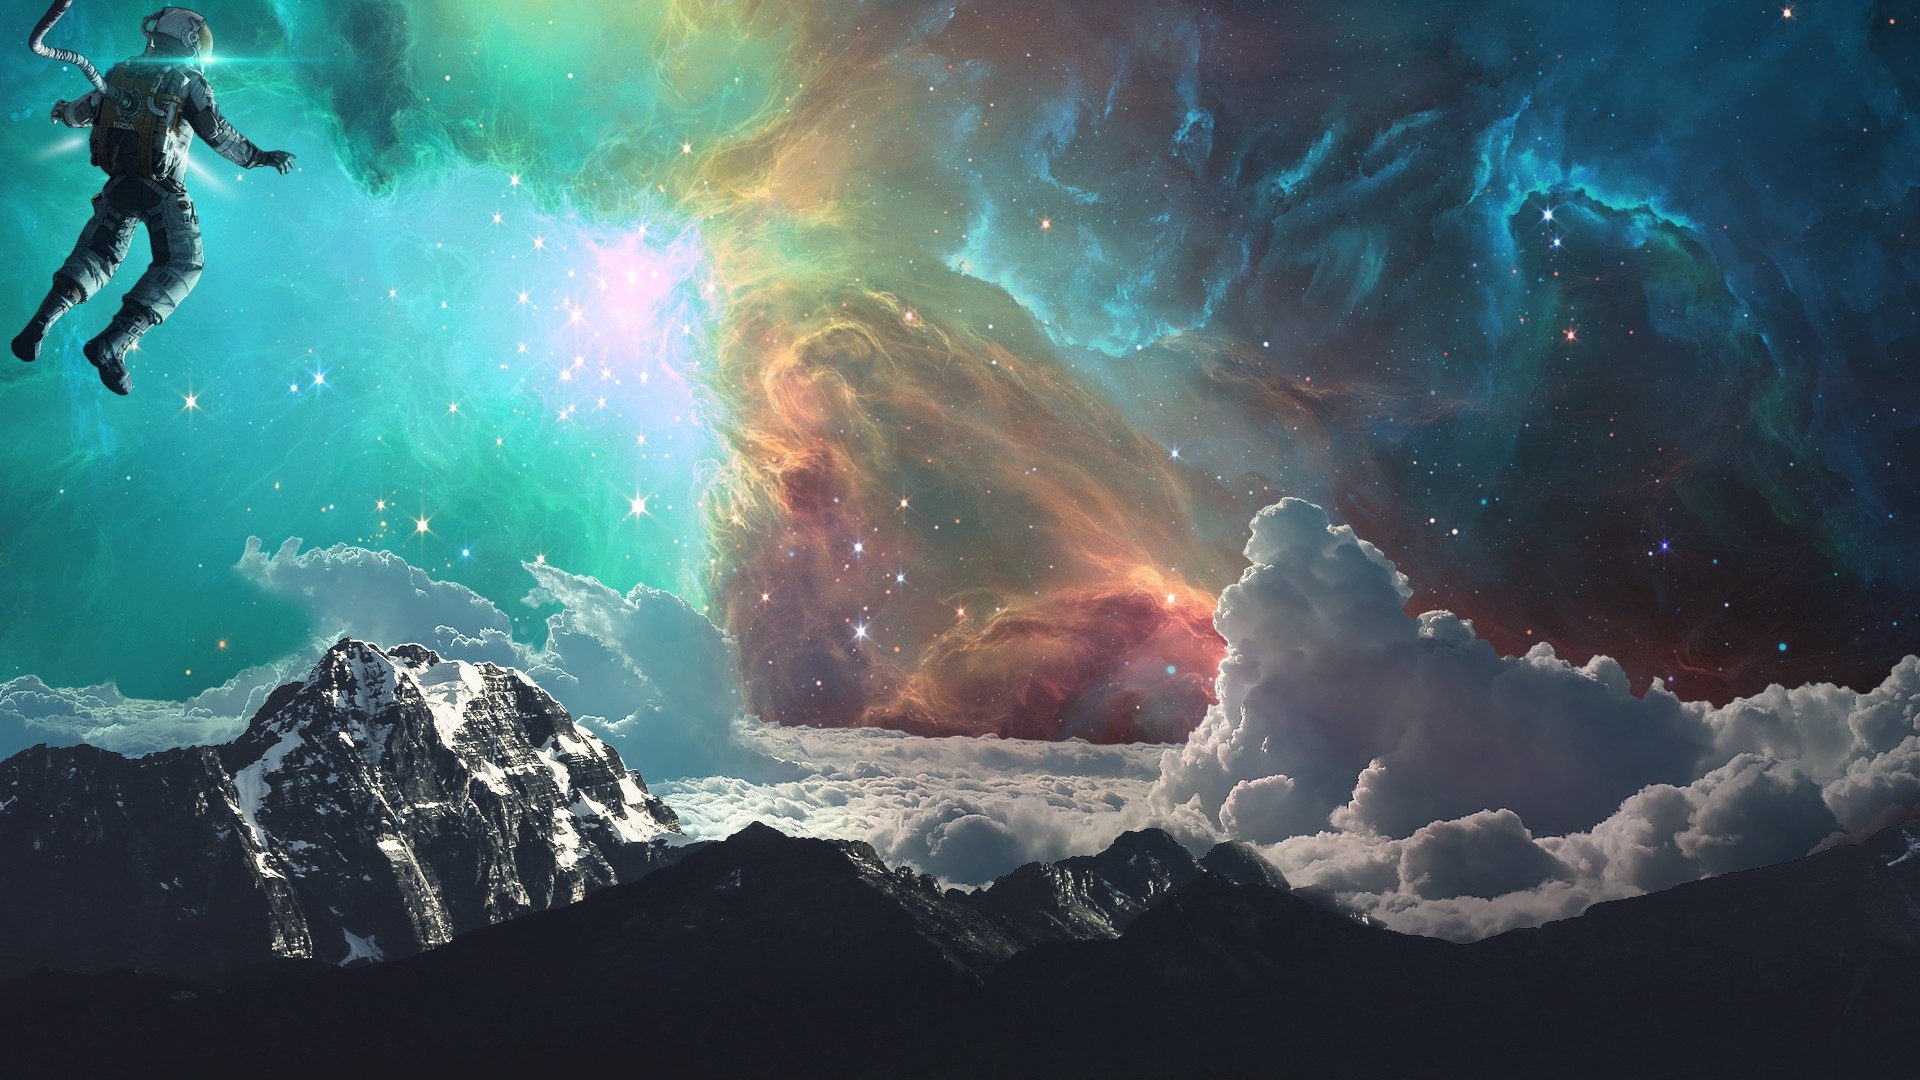 General 1920x1080 space astronaut galaxy Earth clouds mountains photo manipulation science fiction cyan blue stars nebula turquoise